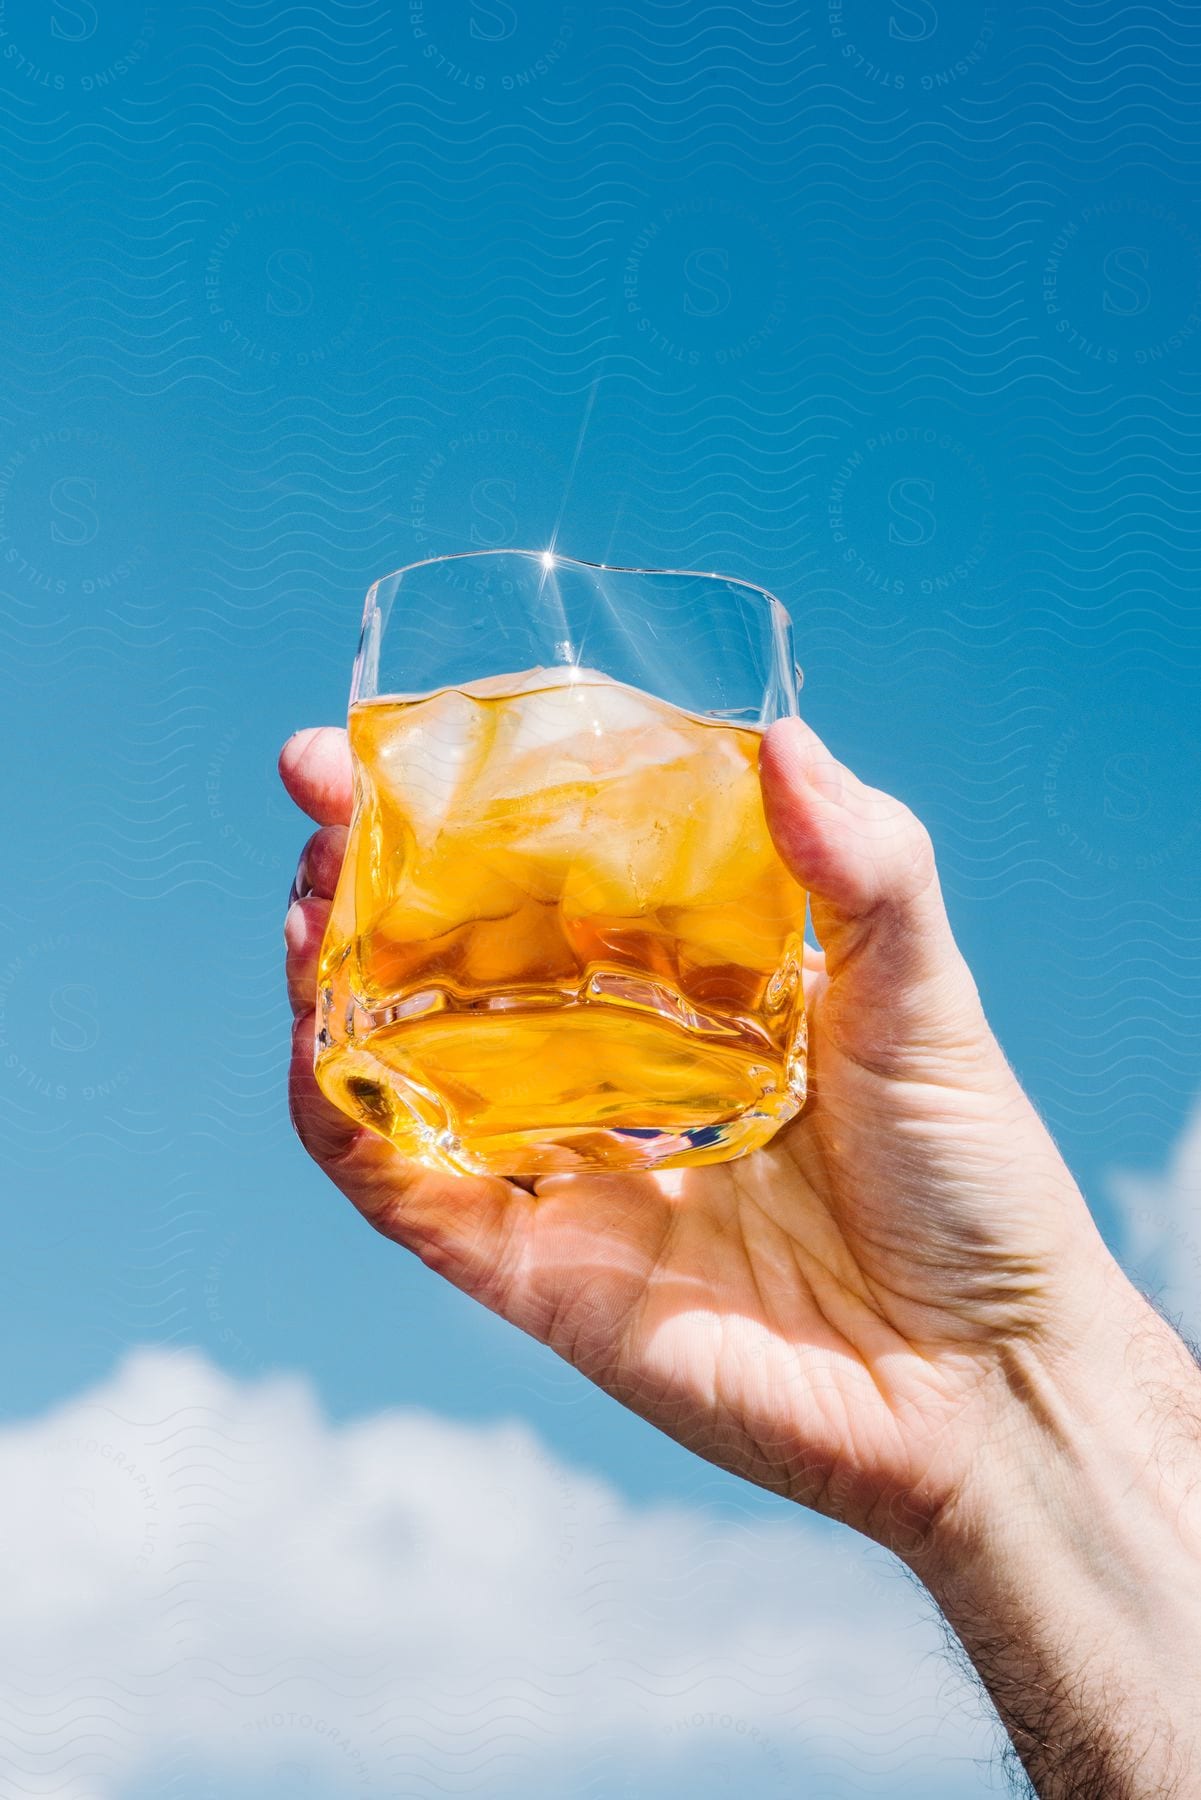 Right hand holds Amber spirit beverage in short glass with ice against blue sky background